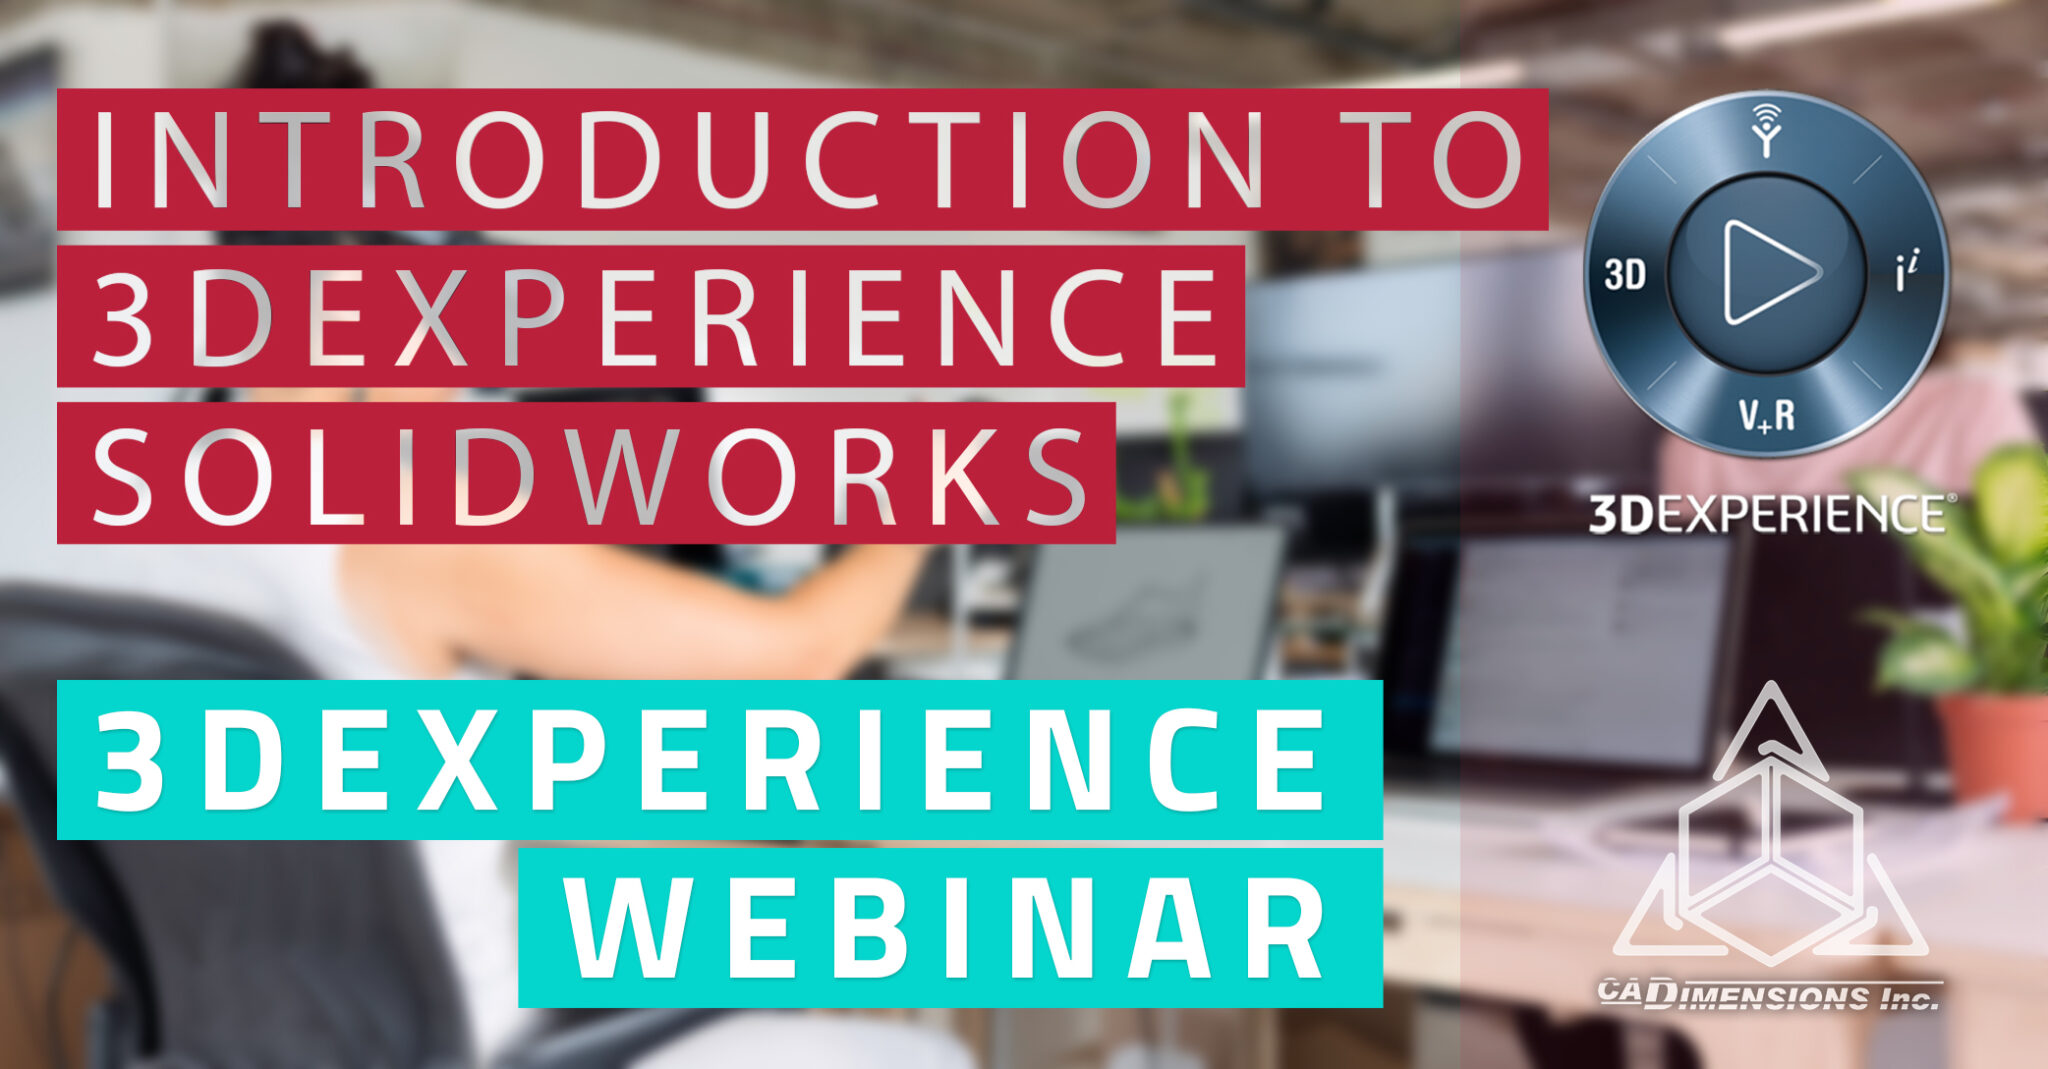 introduction to 3dxperience solidworks webinar